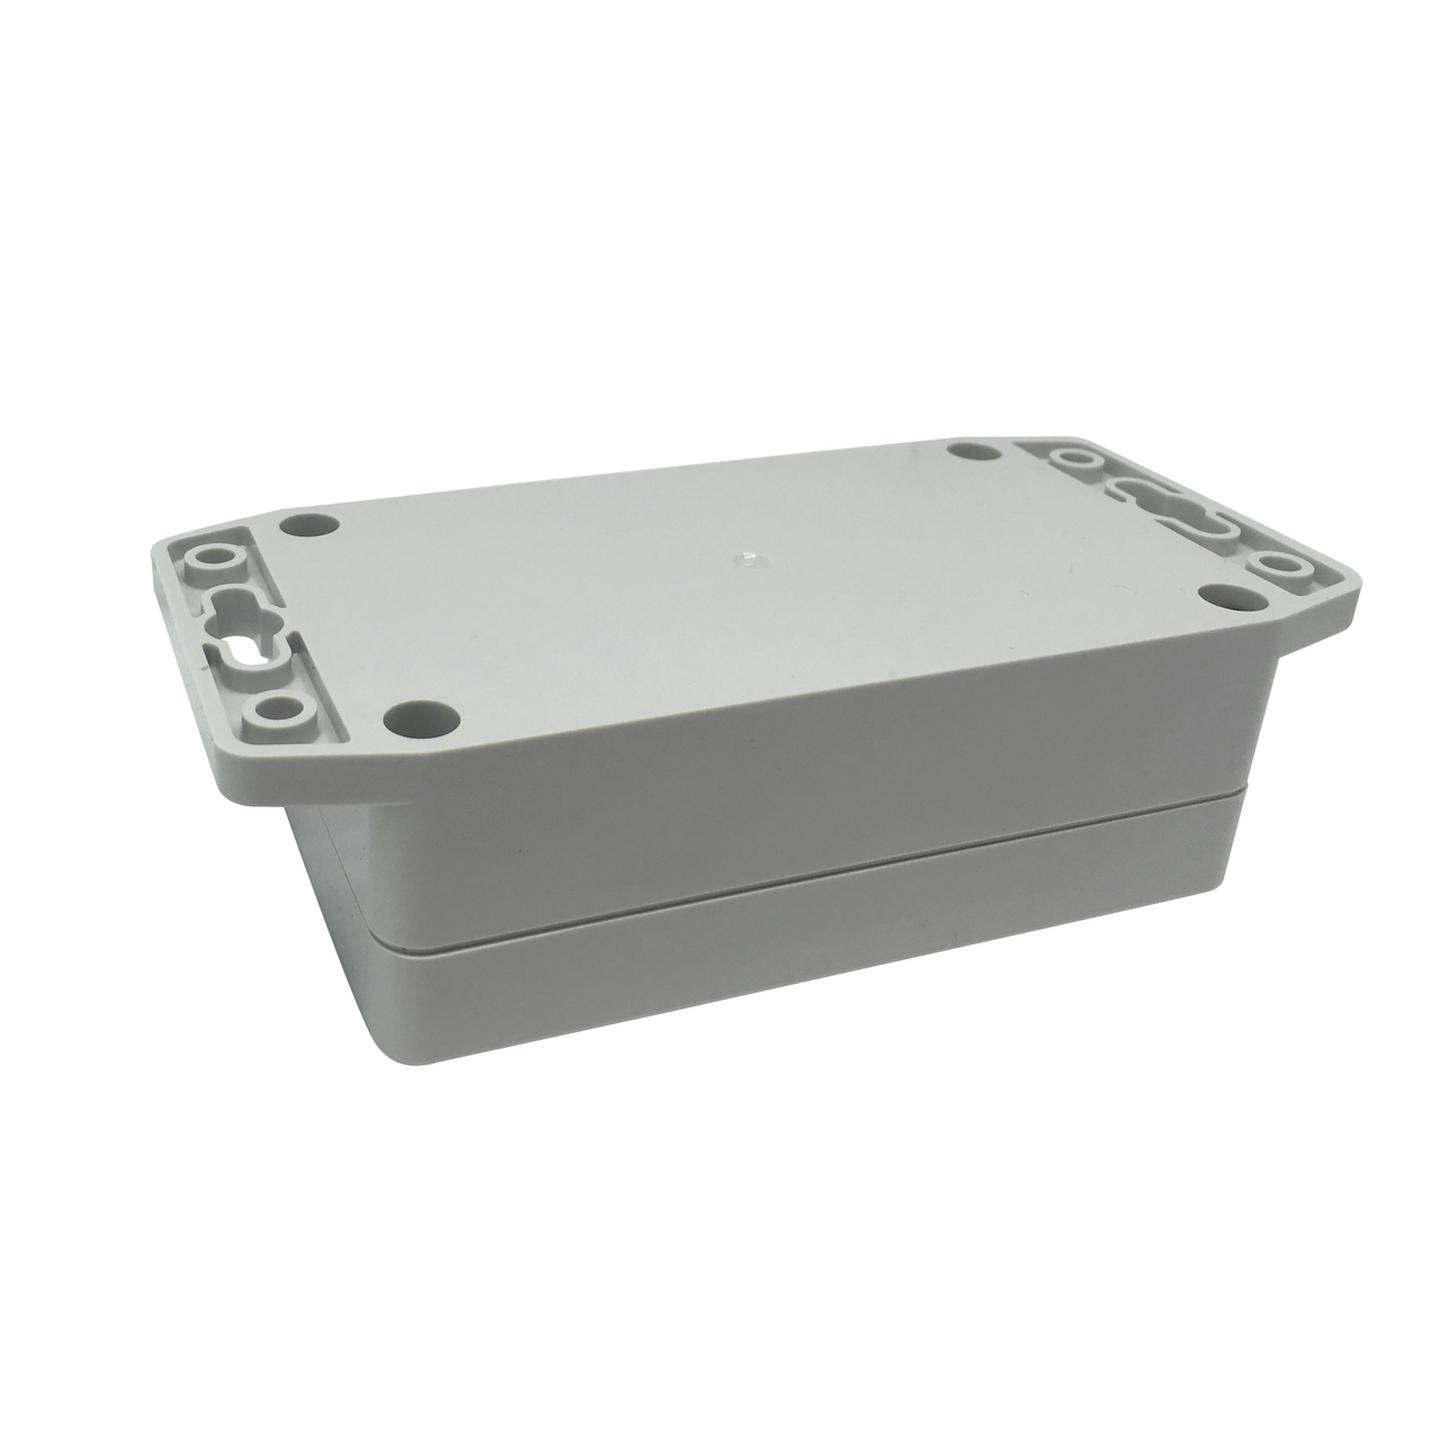 IP65 Sealed Polycarbonate Enclosures - Light Grey with Mounting Flange - 115W x 65D x 40Hmm